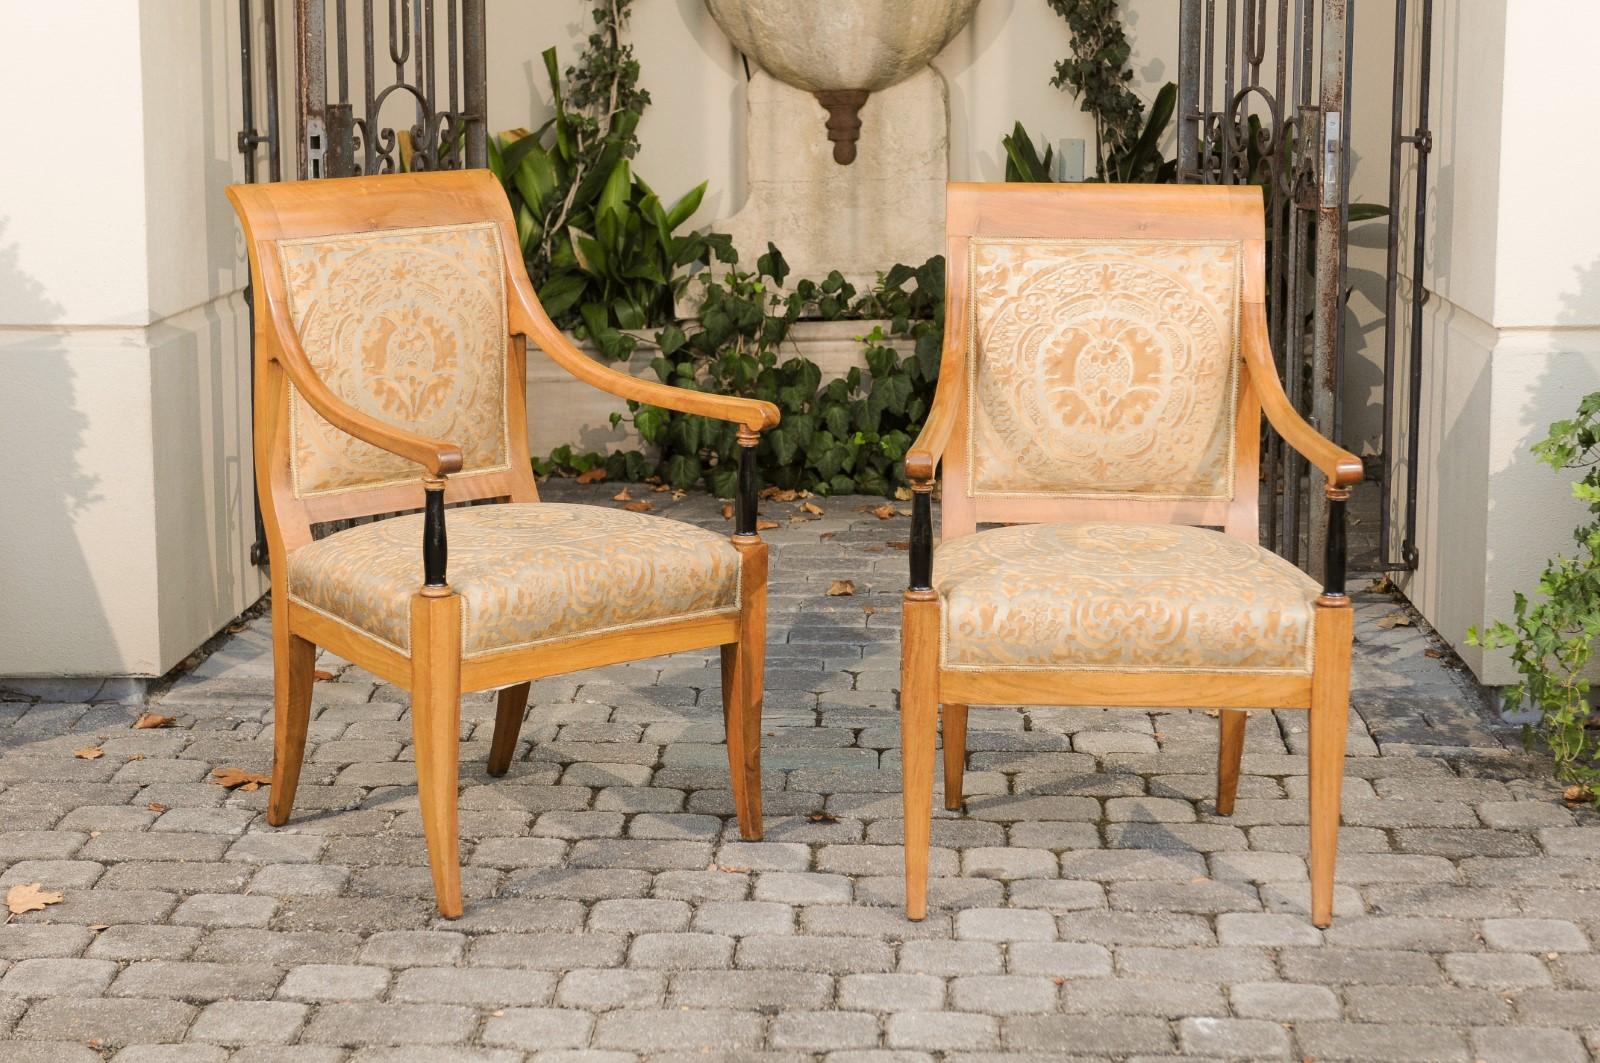 A pair of Austrian Biedermeier period armchairs from the mid-19th century, with Fortuny fabric and ebonized columns. Born in Imperial Austria during the first half of the 19th century, each of these Biedermeier armchairs attracts our attention with